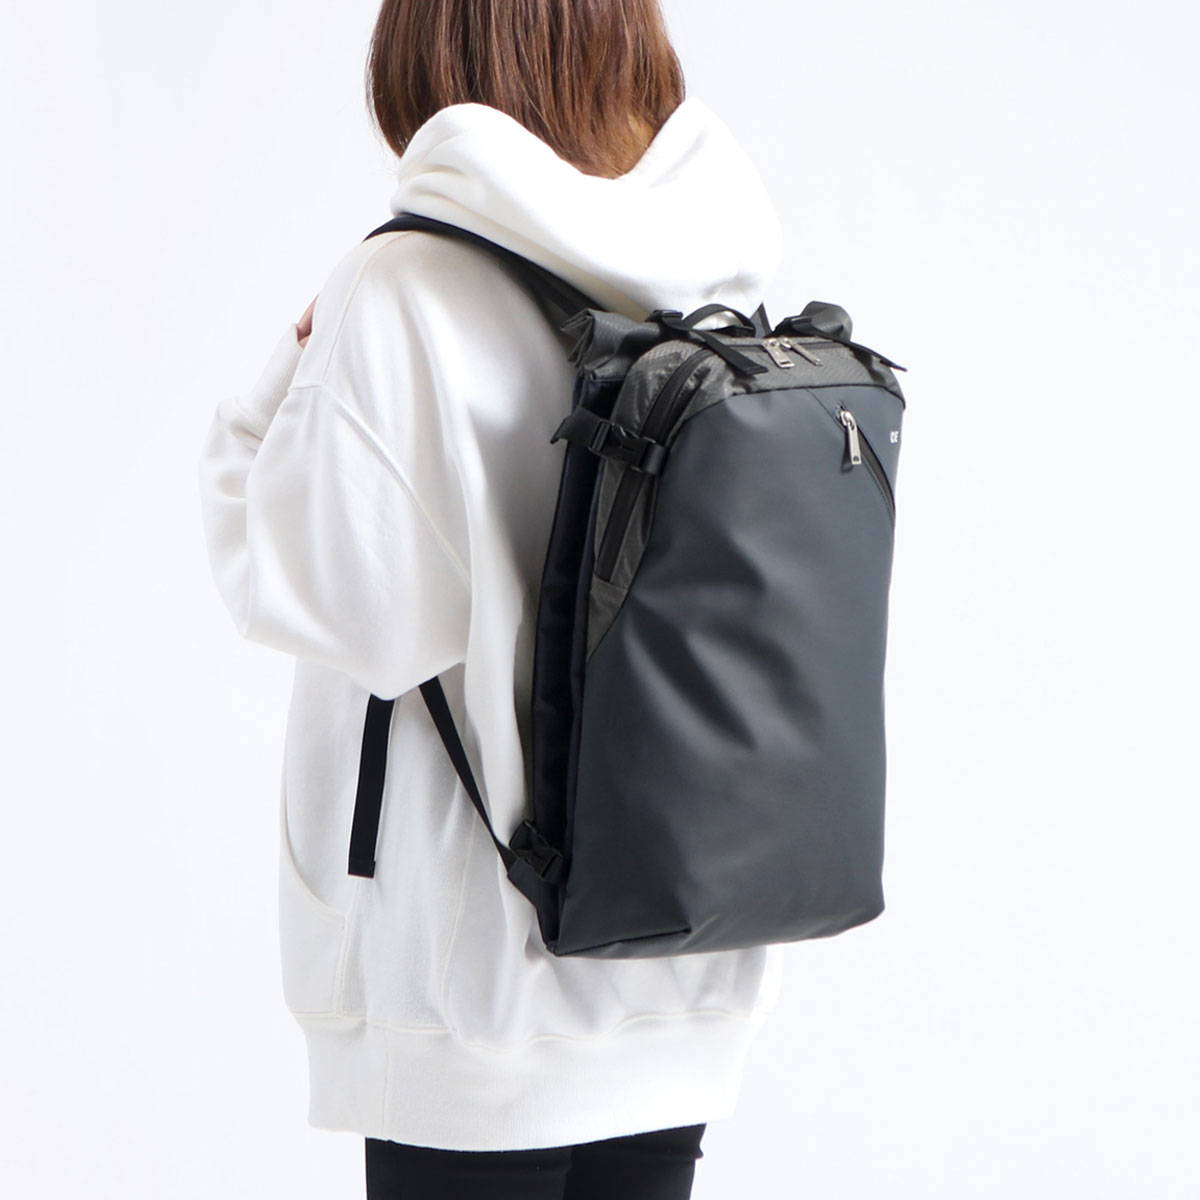 CIE シー VARIOUS BACKPACK-01 バックパック 021800｜【正規販売店